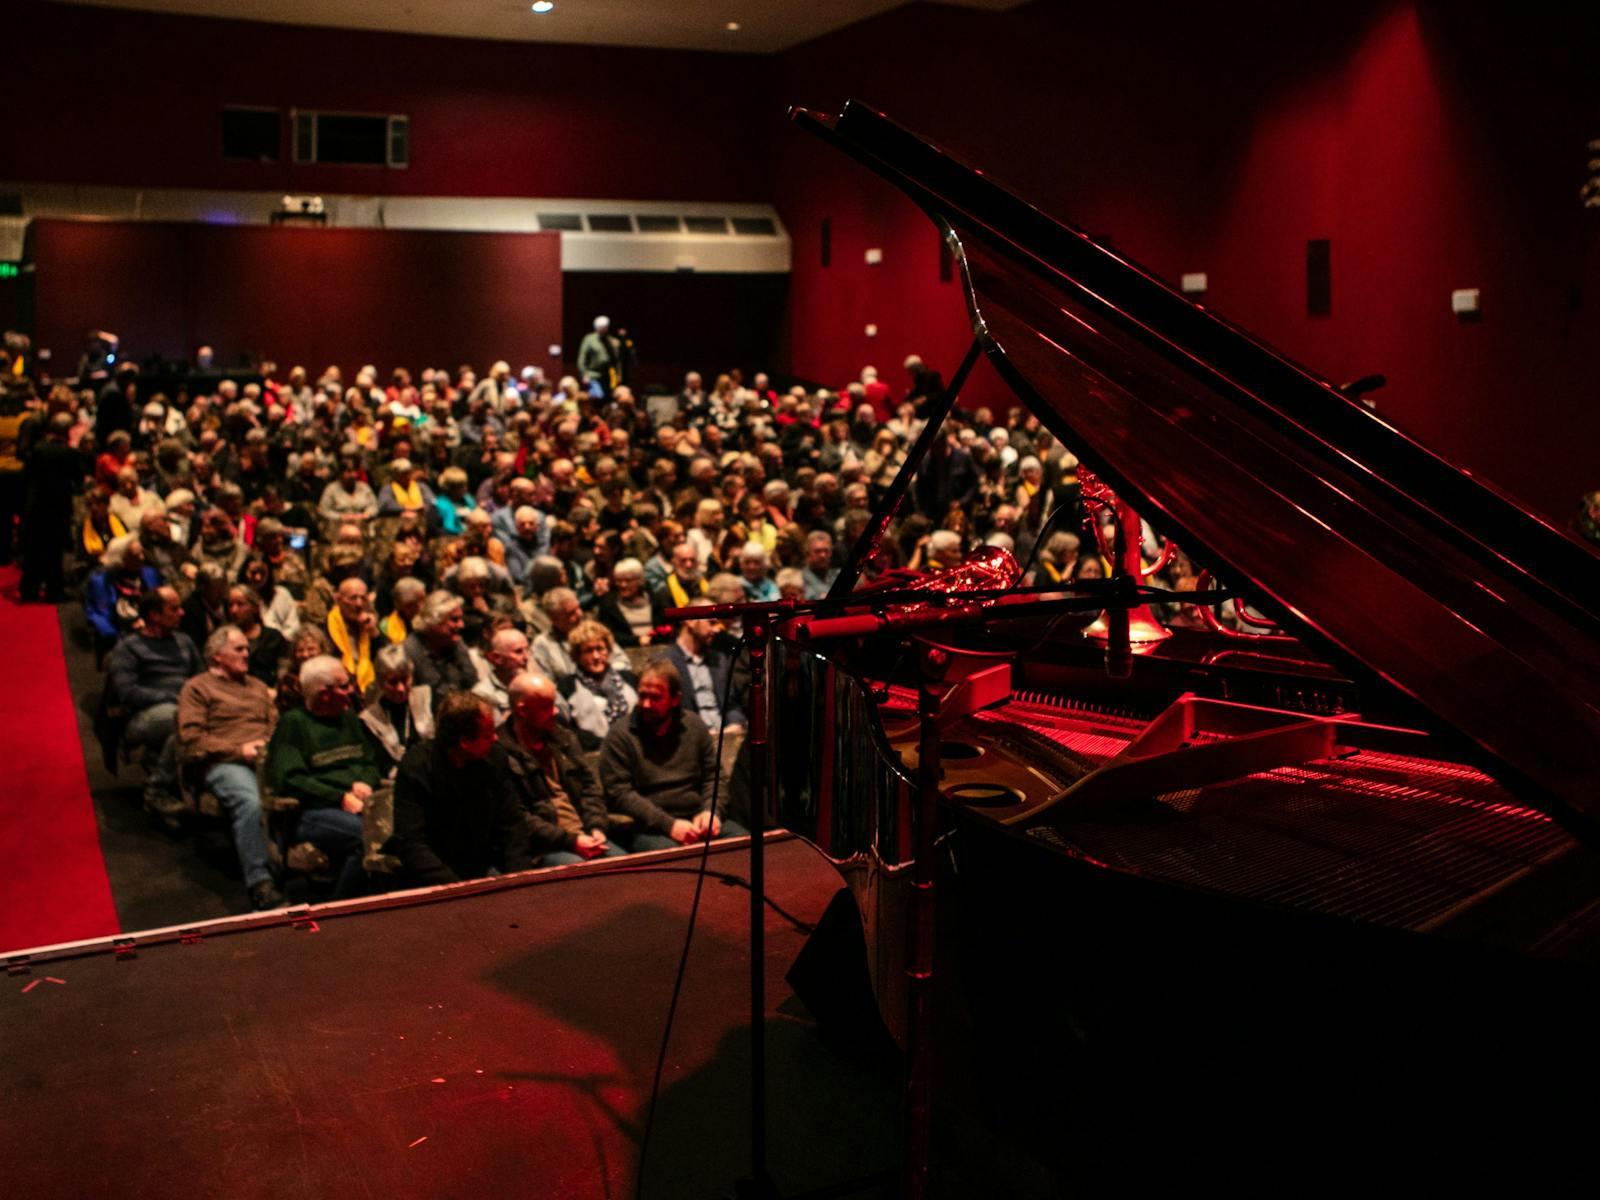 A full house at the Town Hall Theatre, photo taken from the stage